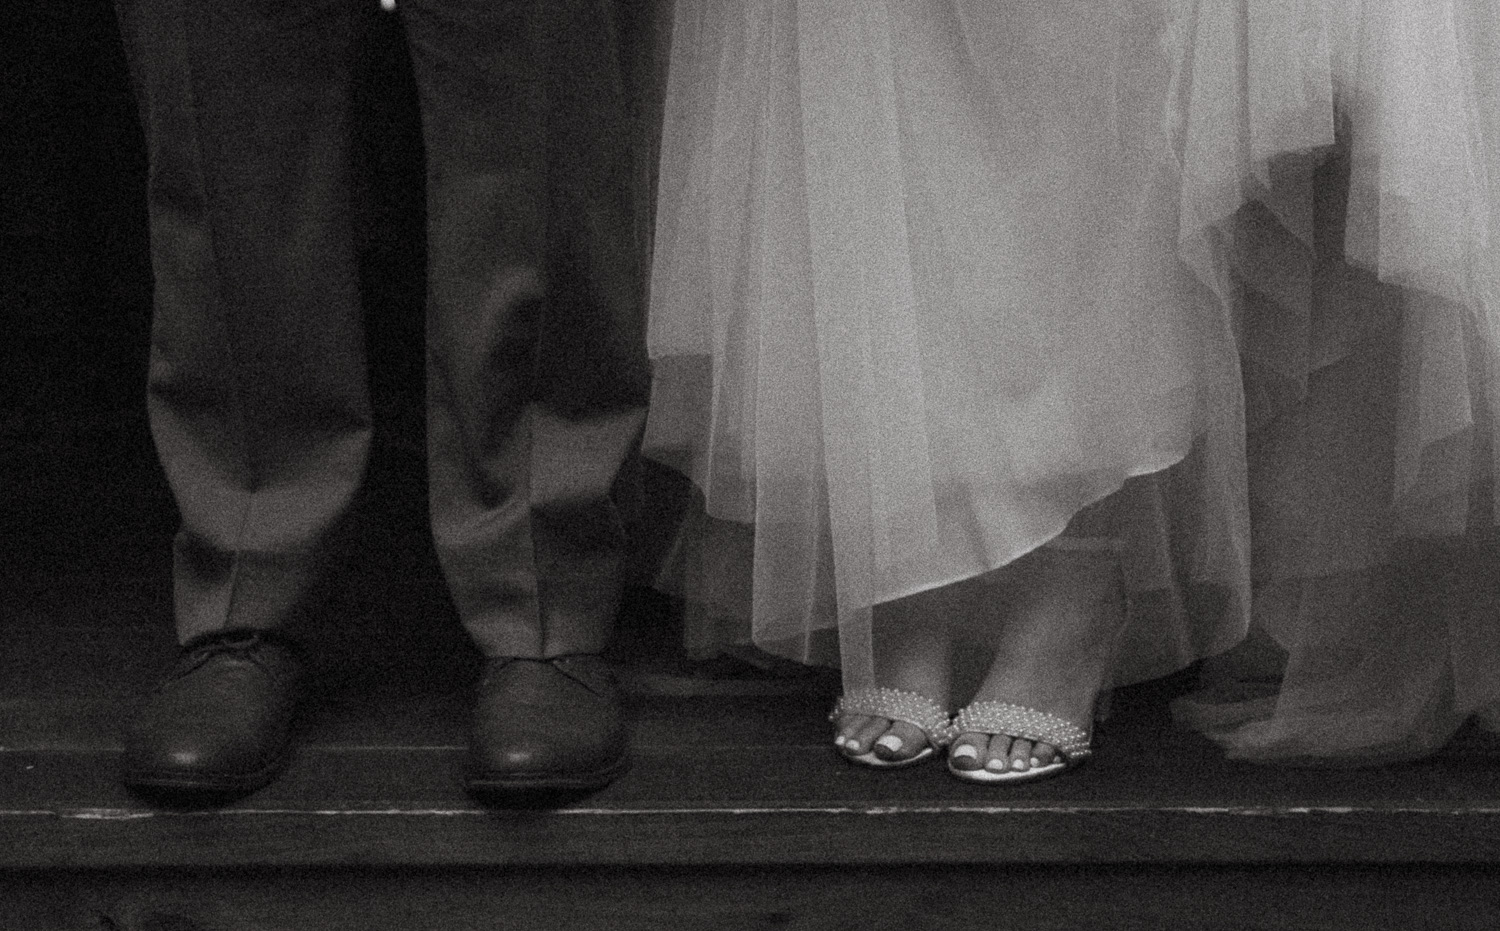 An Asheville elopement couple where showing off their footwear in a black and white image